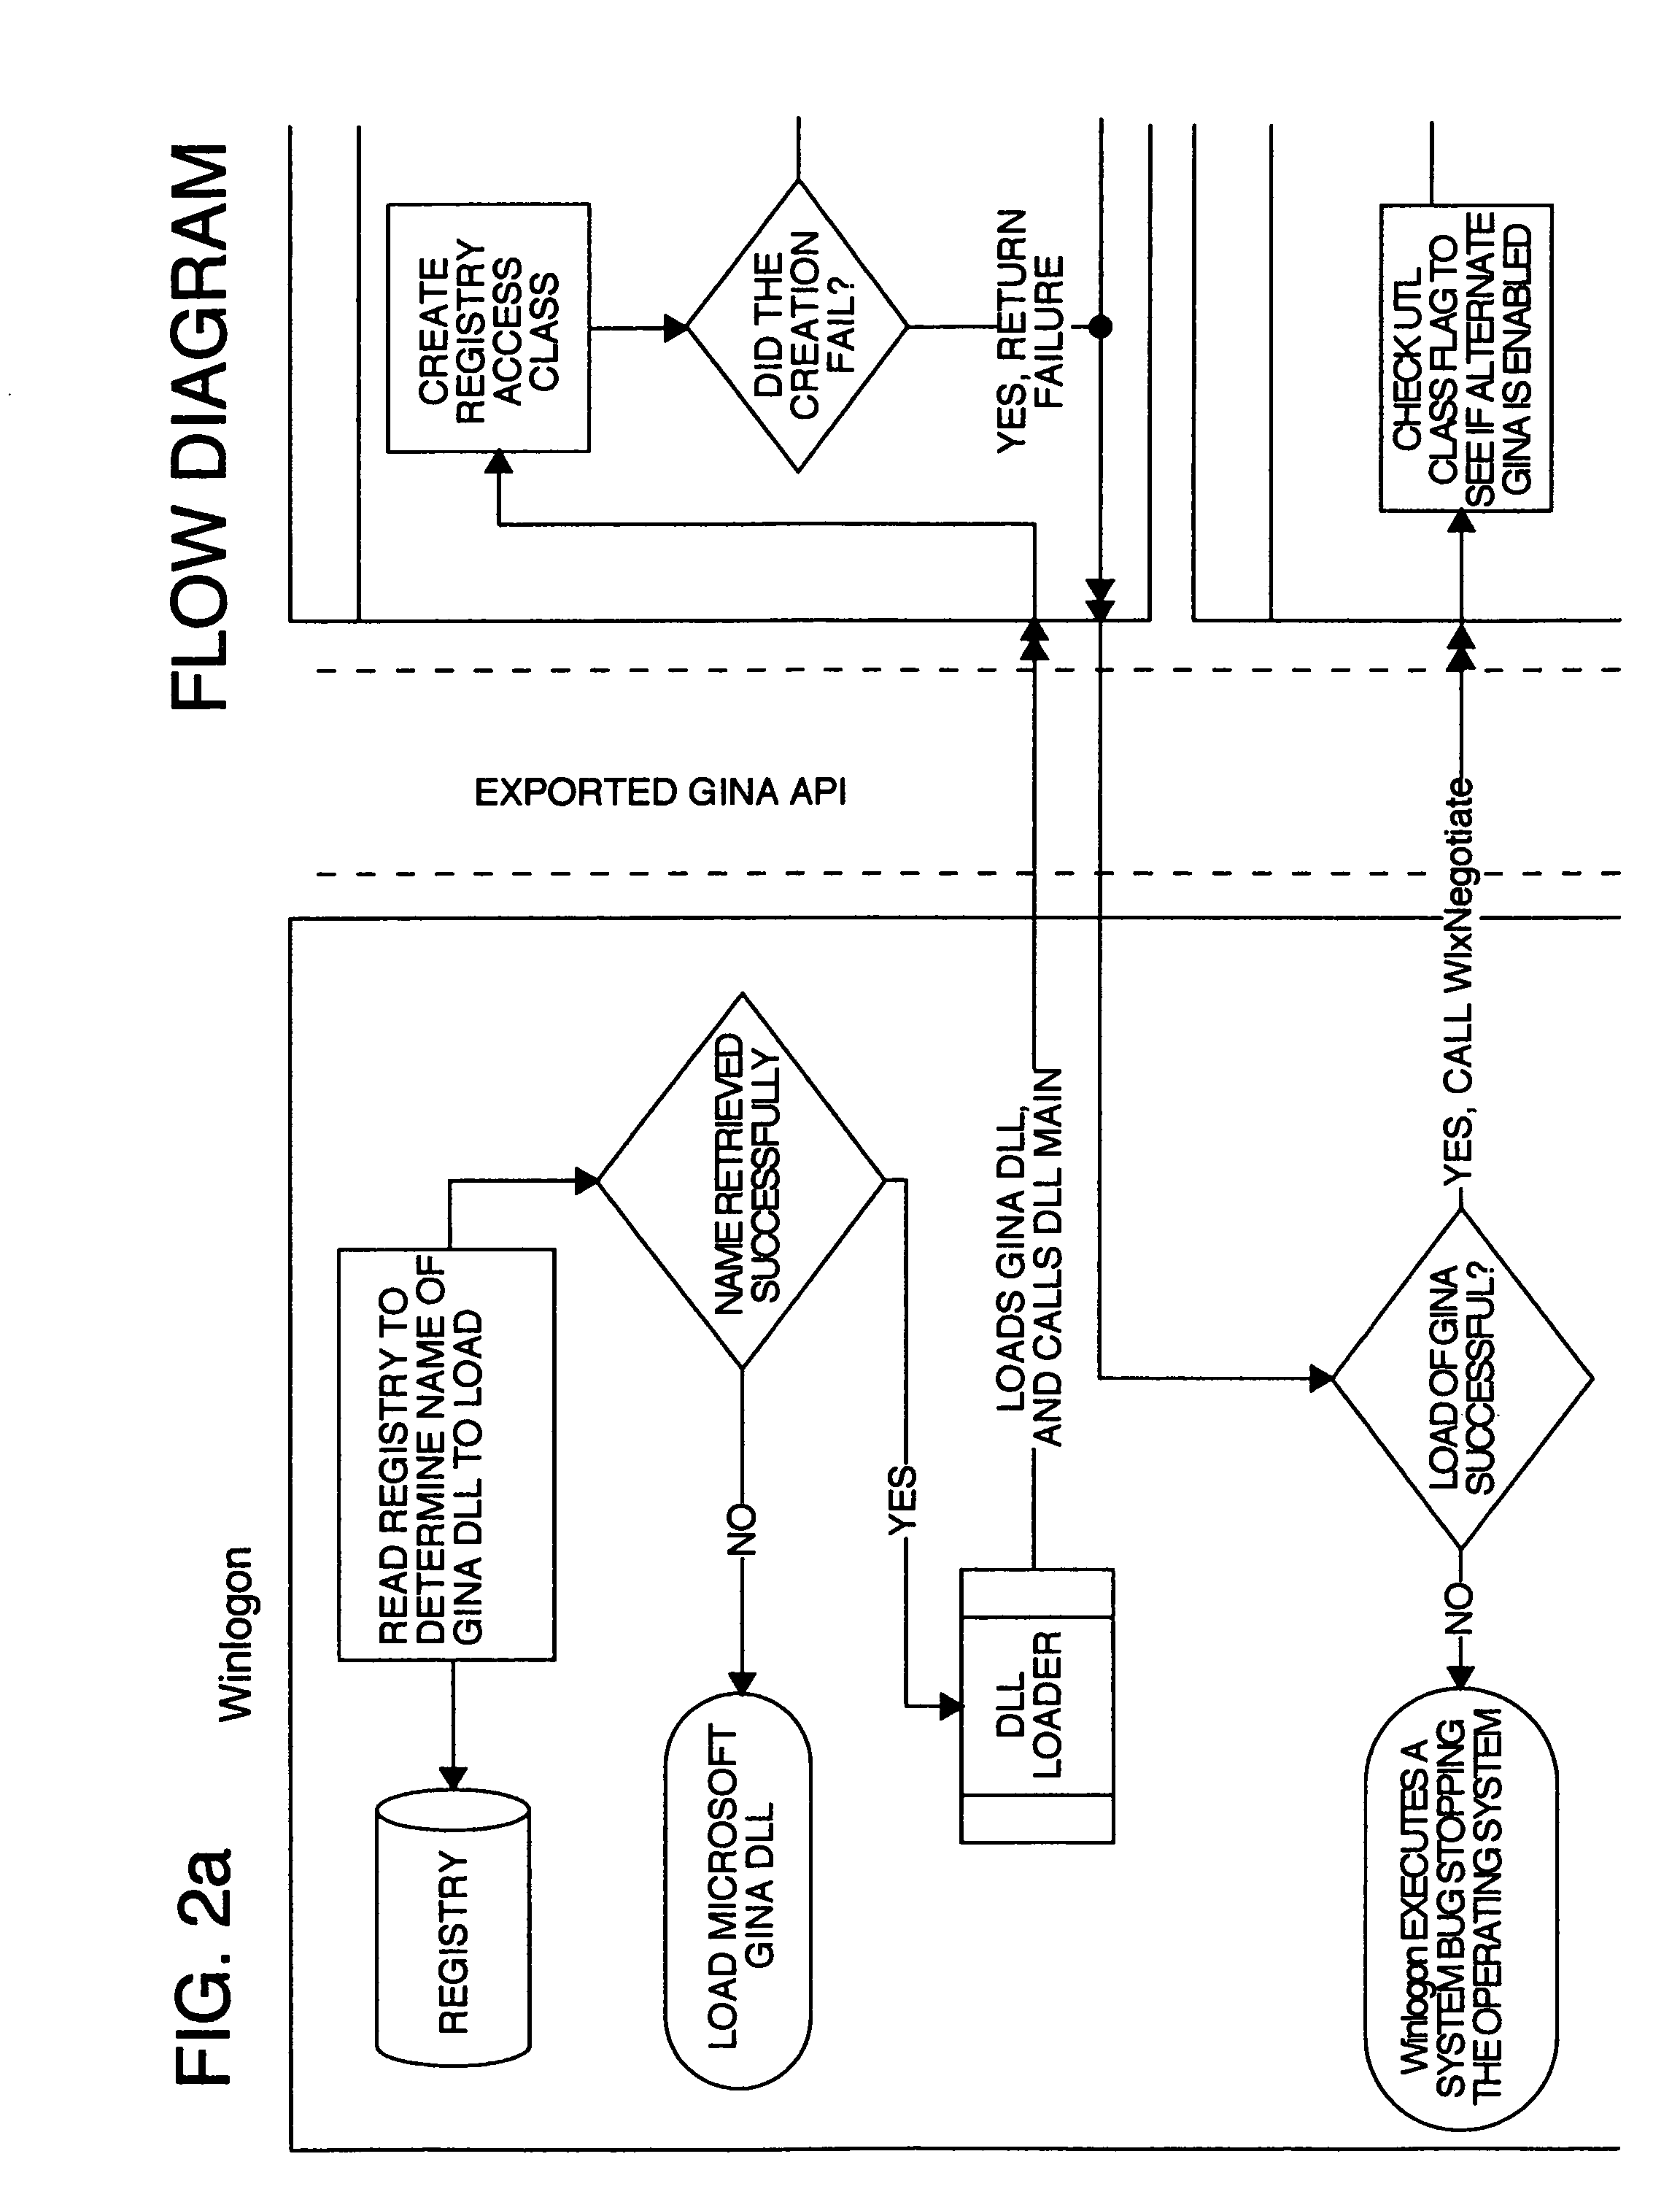 Multiple user desktop graphical identification and authentication